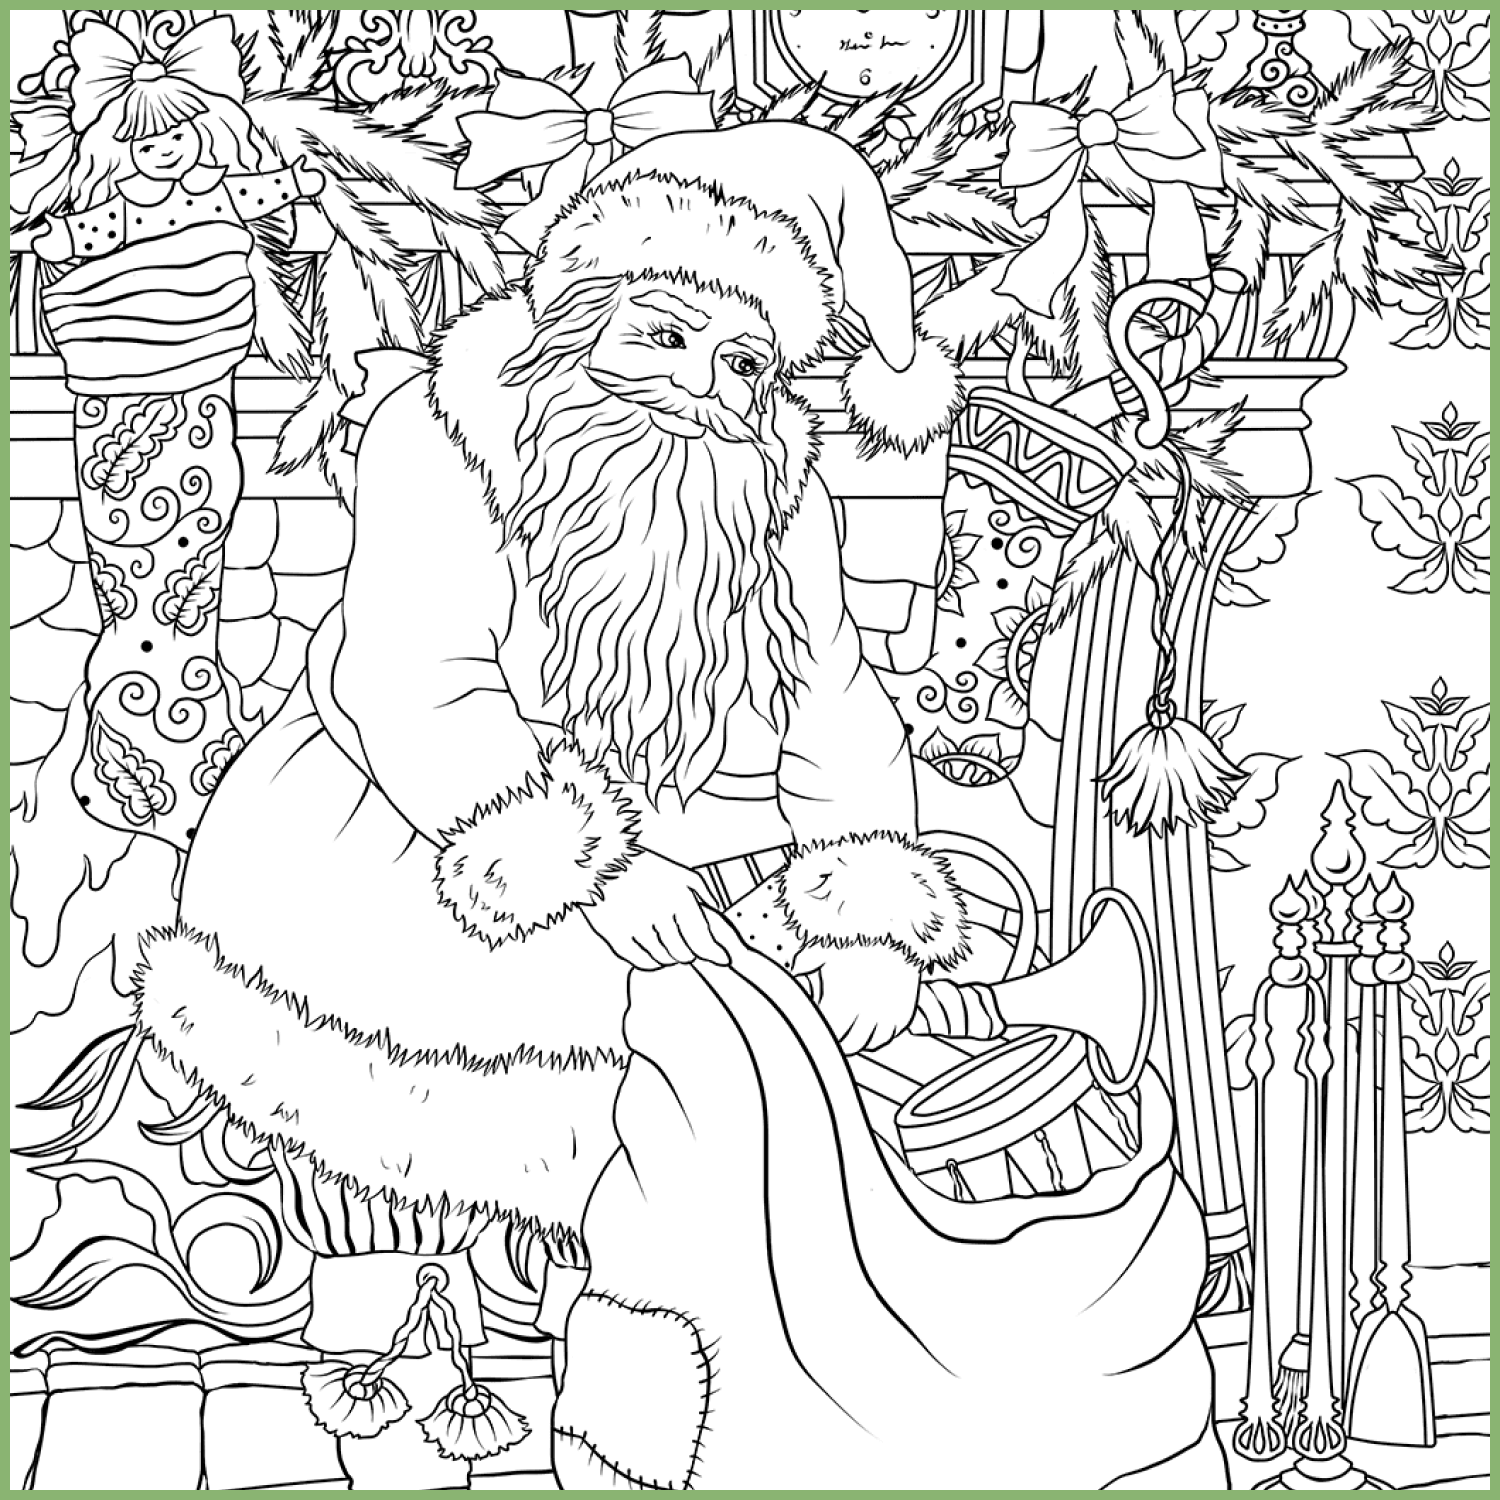 Saint Nickolas opening his bag of presents coloring page cover image.